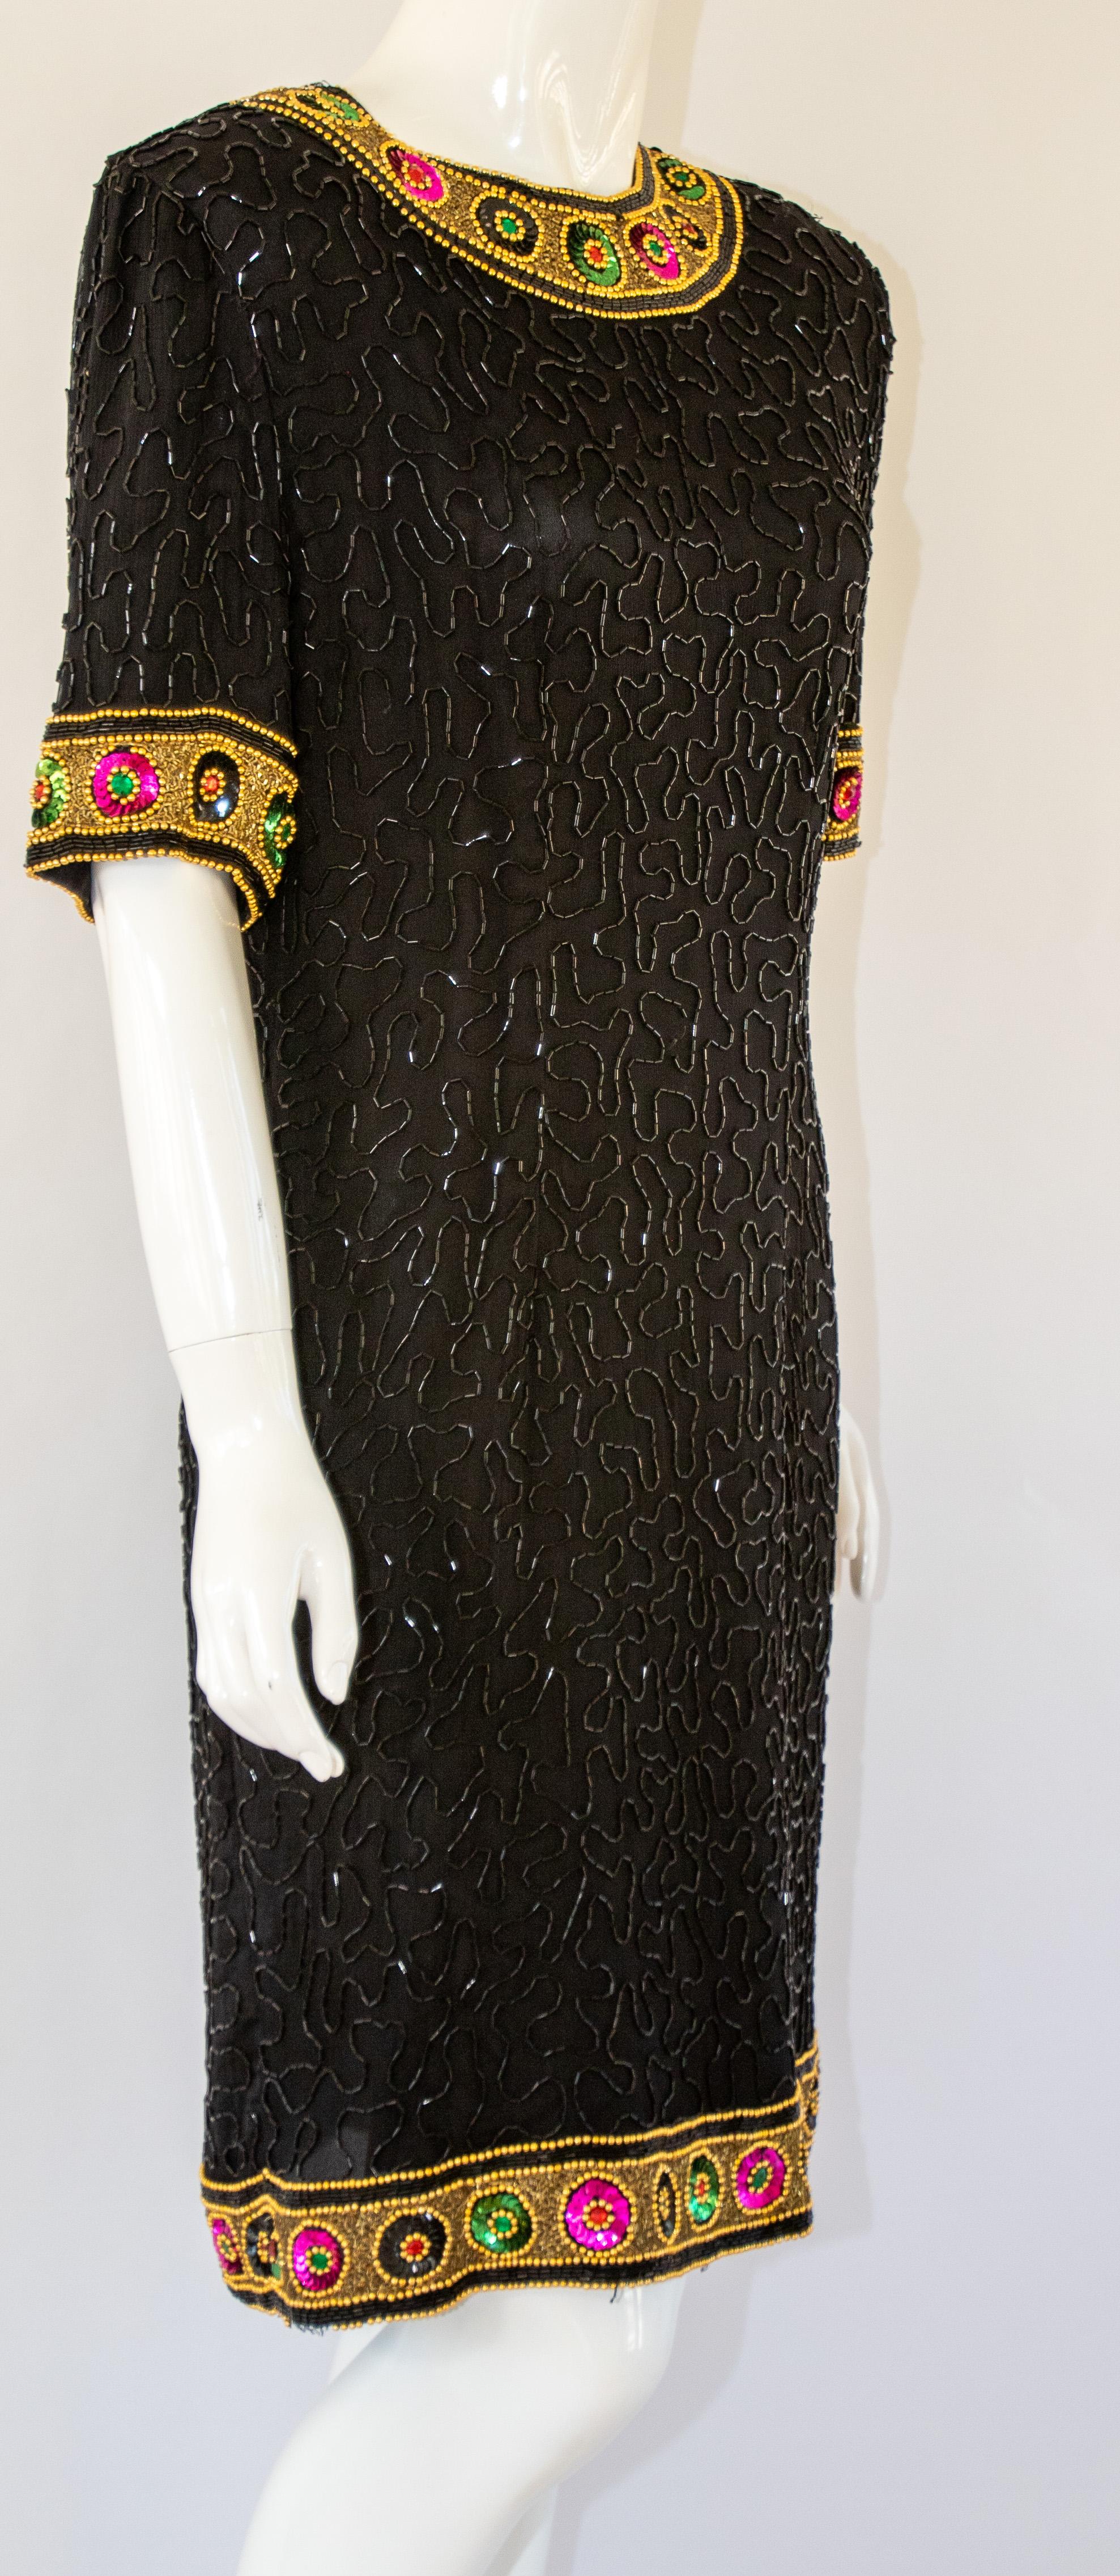 Vintage Art Deco Style Beaded Mini Dress Black and Gold For Sale 4